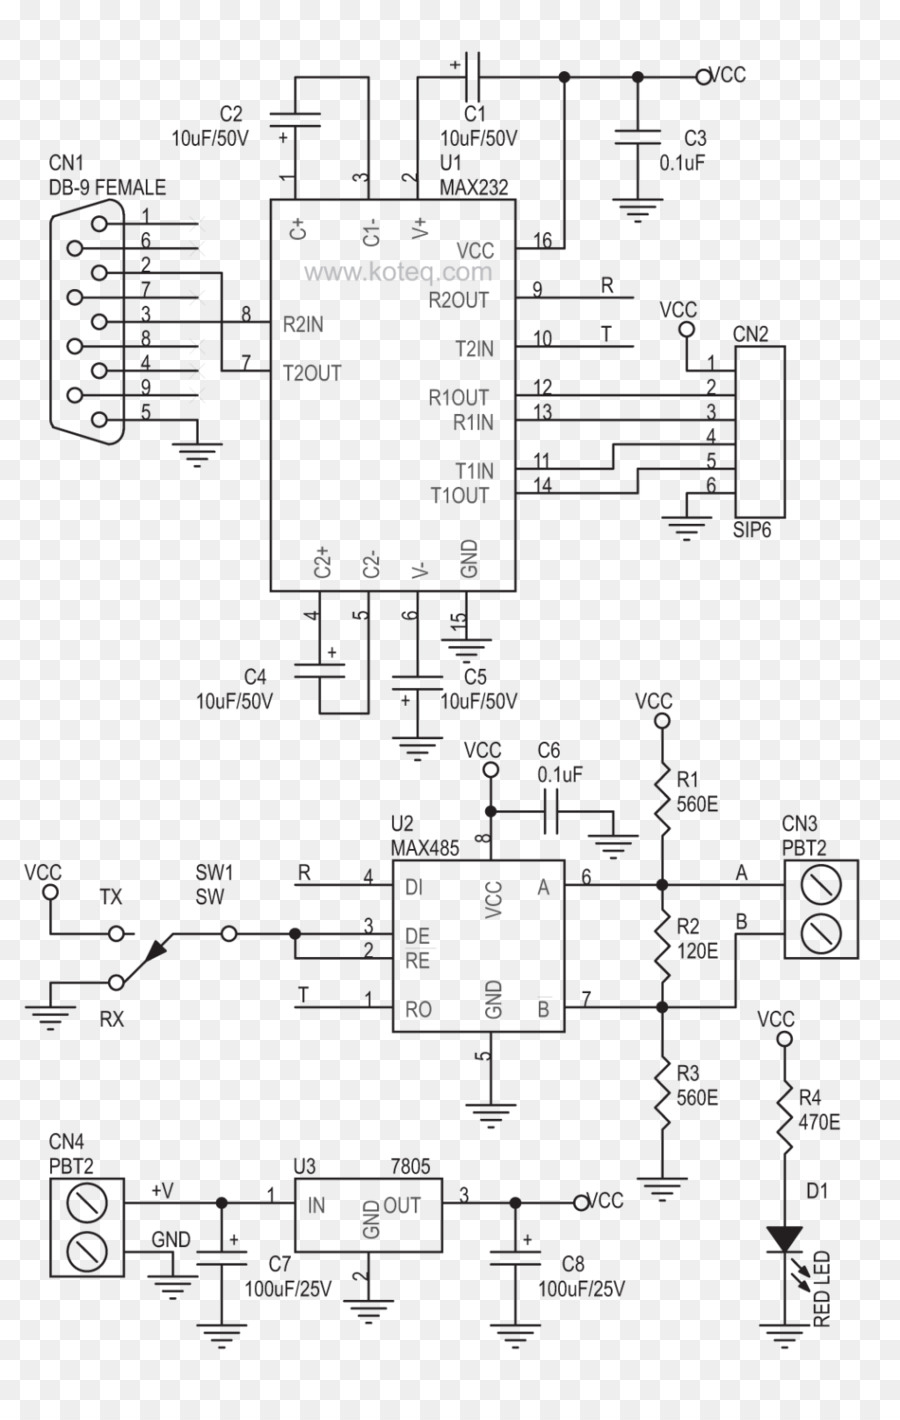 Rs-485 Wiring Diagram Electrical Wires &amp;amp; Cable Rs-232 - Conversion - Rs 485 Wiring Diagram